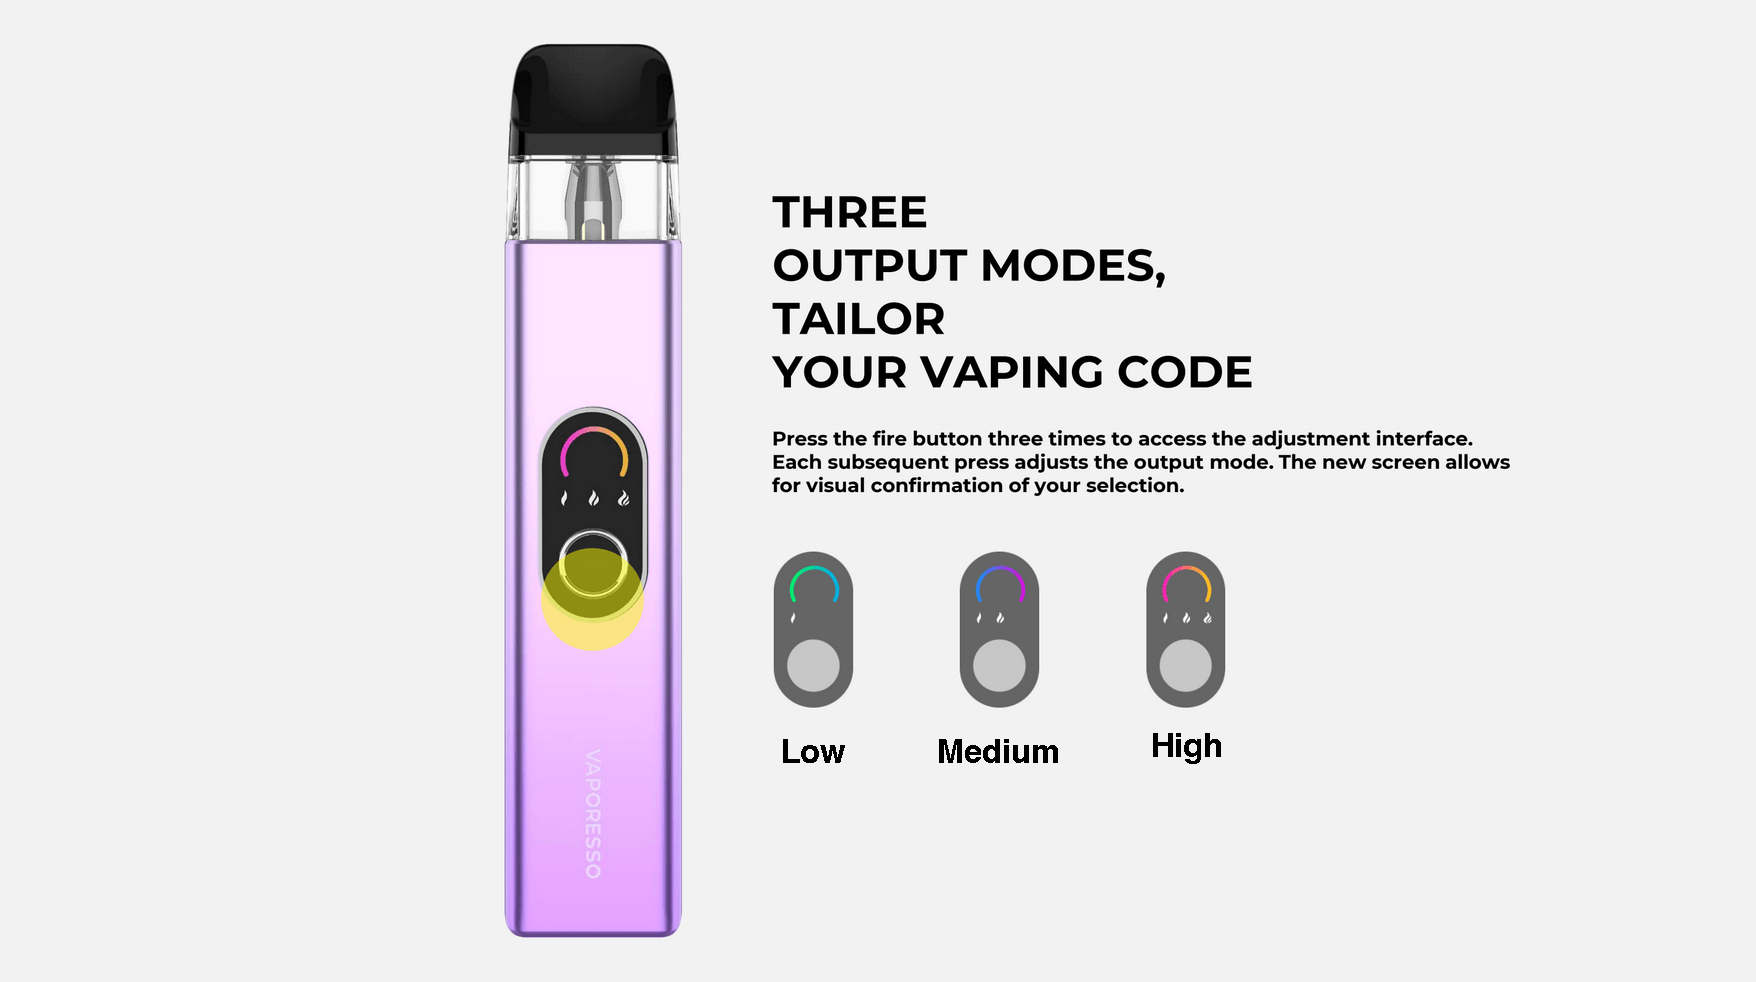 Vaporesso XROS 4 | Three output modes to tailor your vaping code; low, medium and high